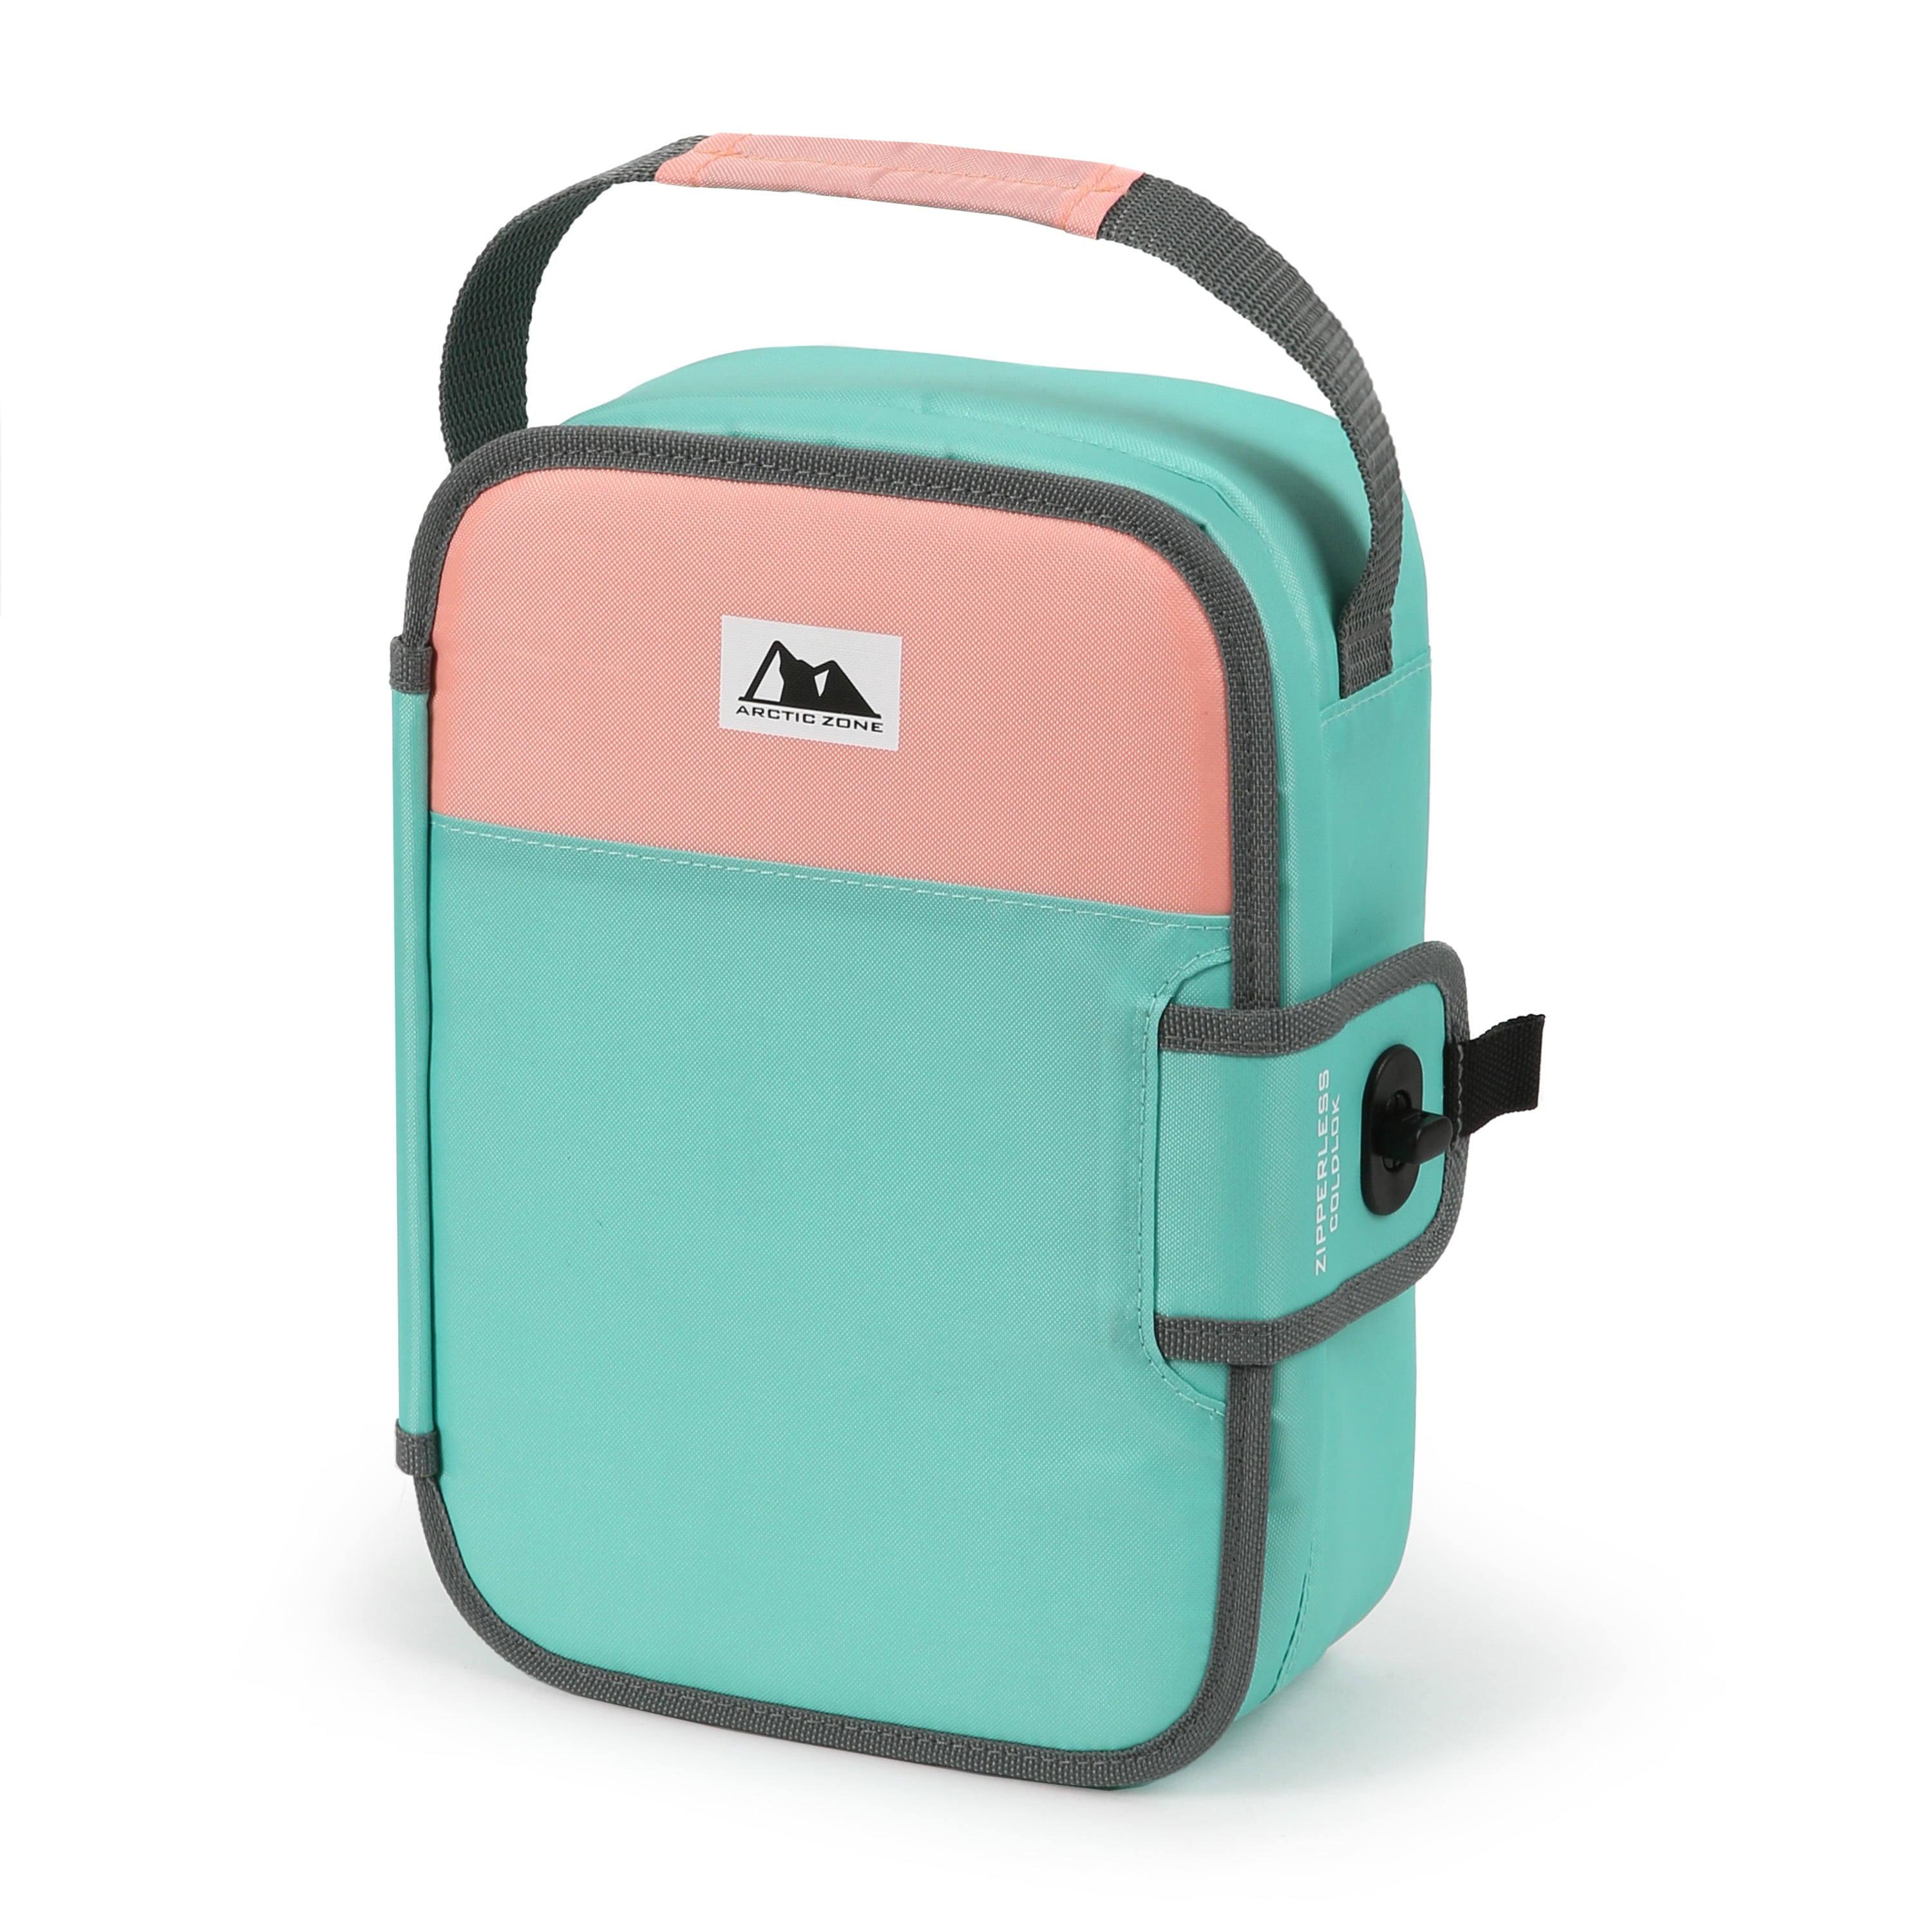 Arctic Zone Rose Pink and Green Insulated Zipperless Lid Built in Tray Lunchbox 